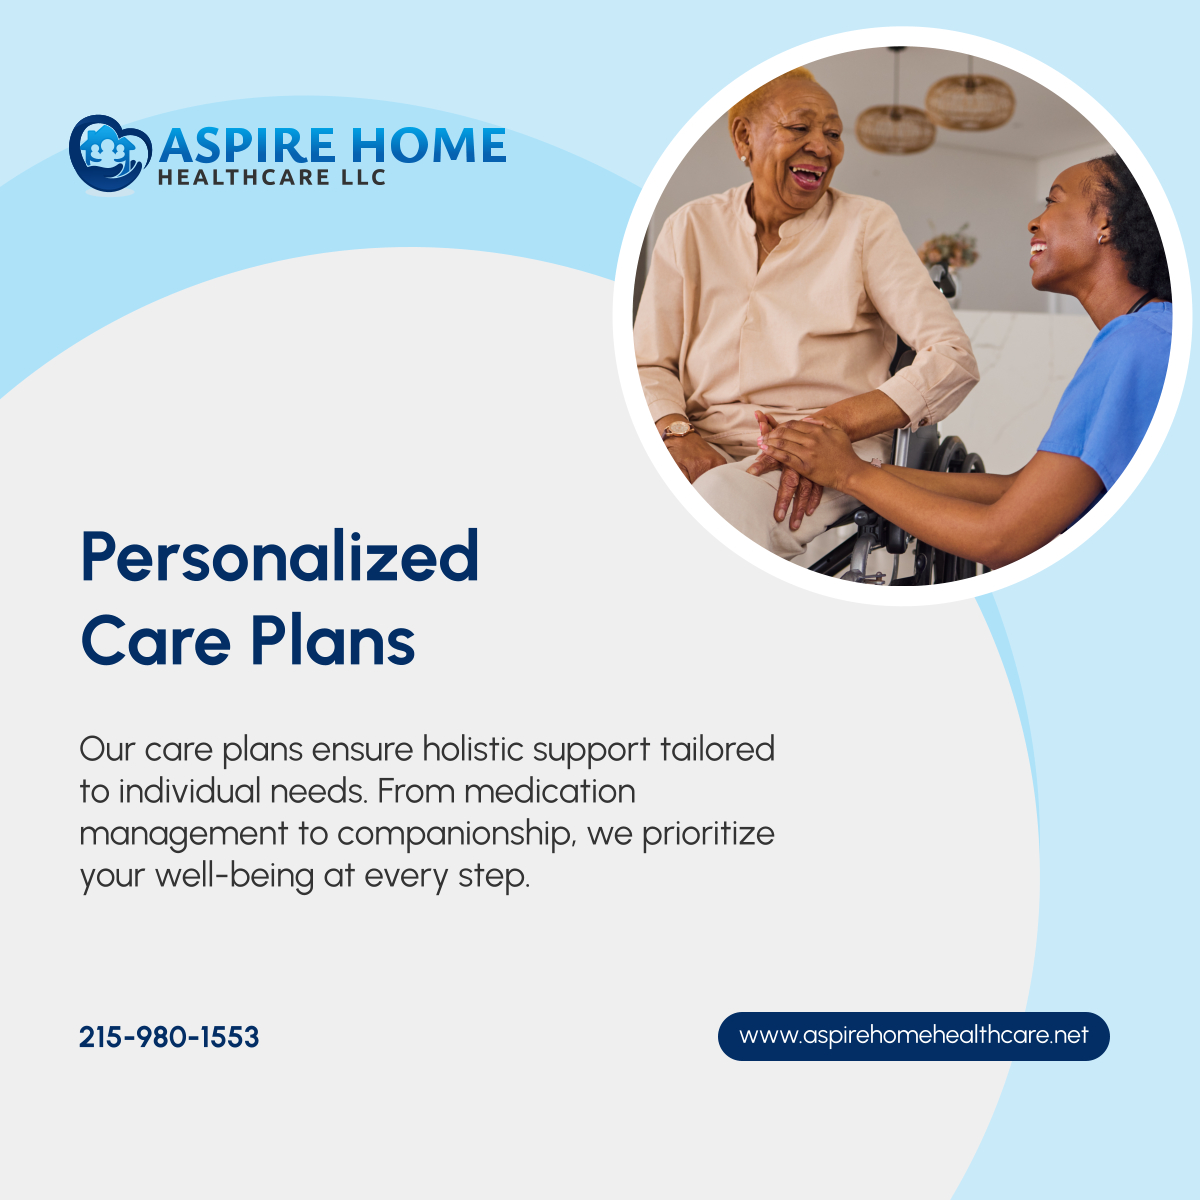 Experience the difference with our personalized care plans. Let us provide the support you need for a happier, healthier life at home. 

#PersonalizedCare #JenkintownPA #HomeHealthcare